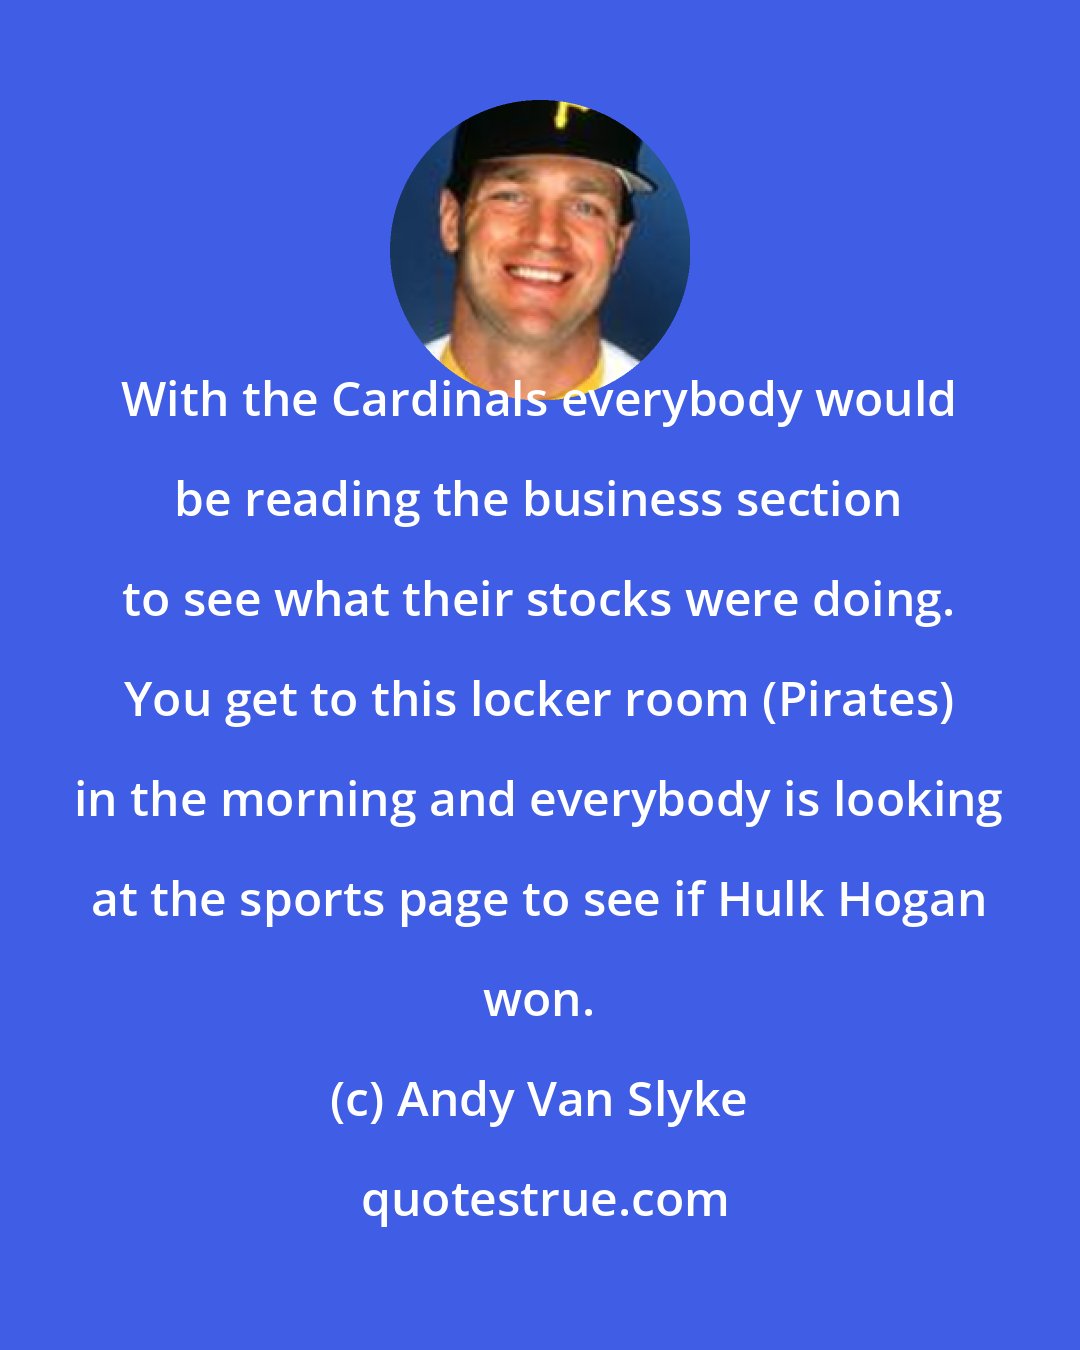 Andy Van Slyke: With the Cardinals everybody would be reading the business section to see what their stocks were doing. You get to this locker room (Pirates) in the morning and everybody is looking at the sports page to see if Hulk Hogan won.